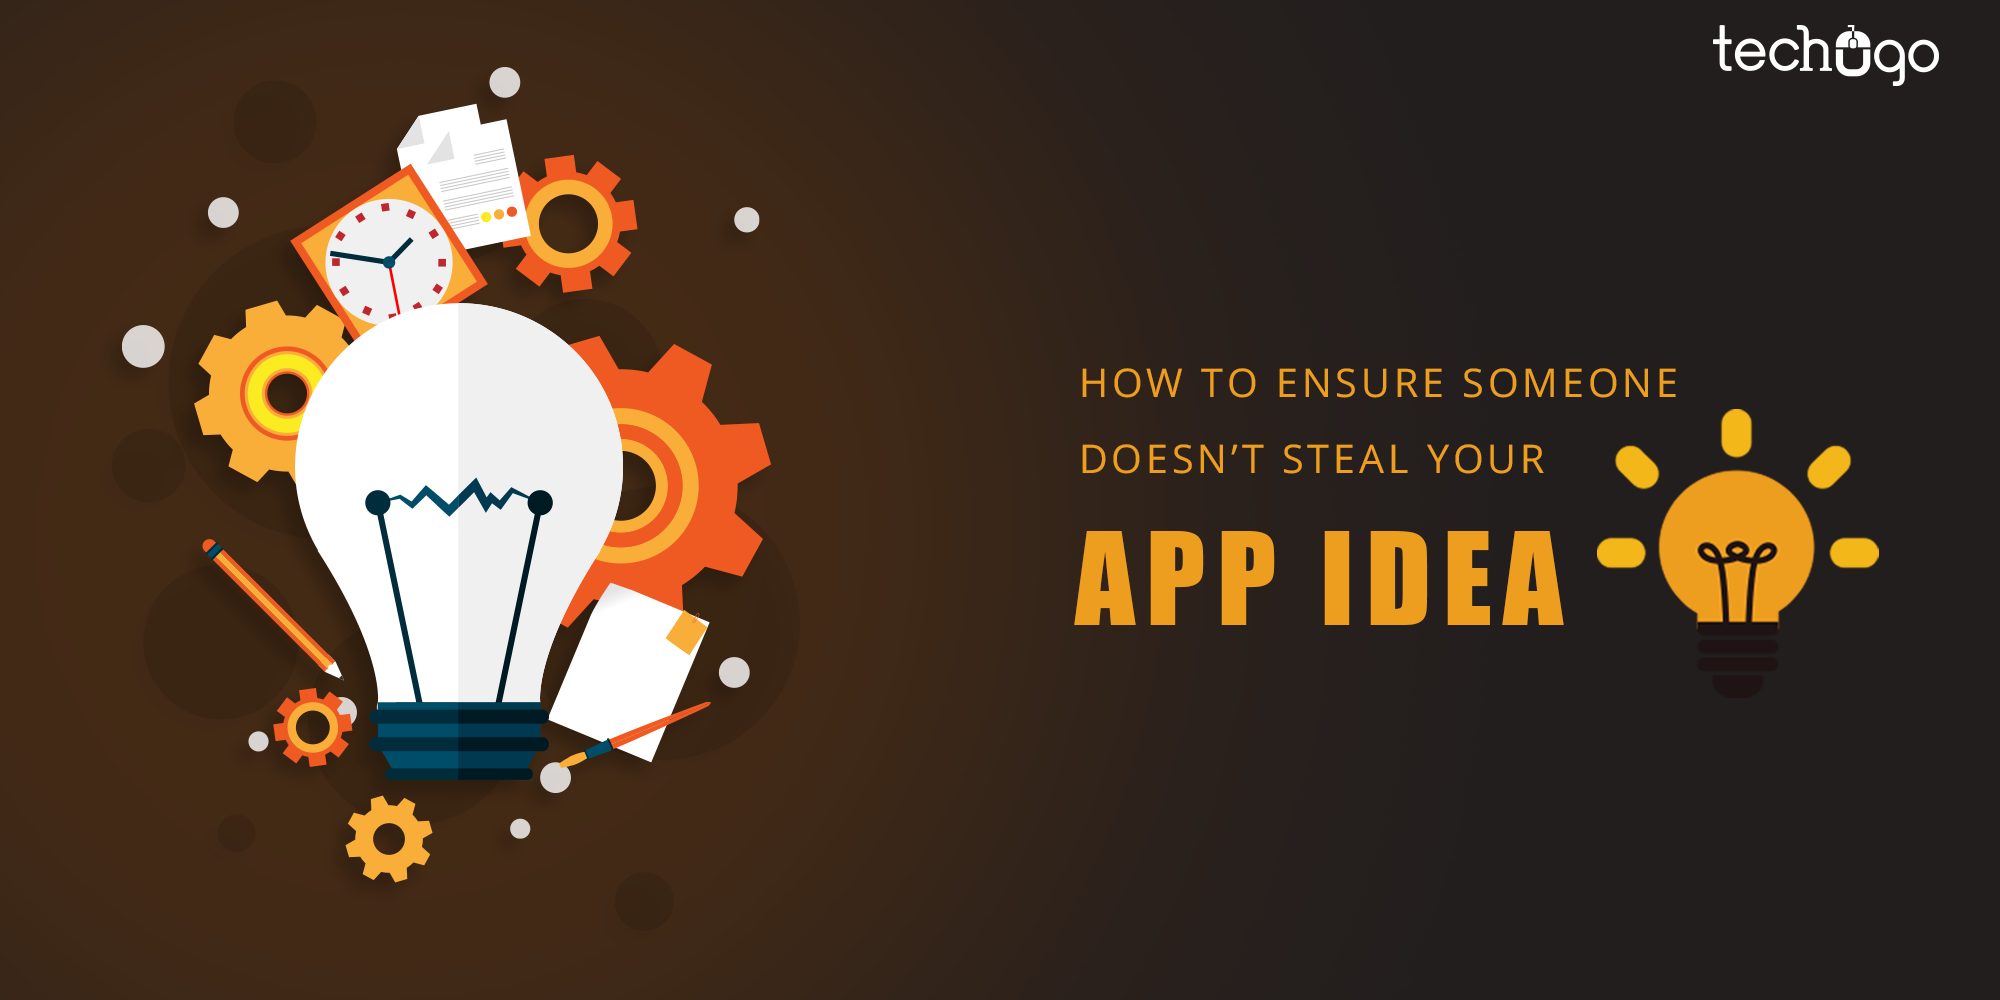 How To Ensure Someone Doesn’t Steal Your App Idea